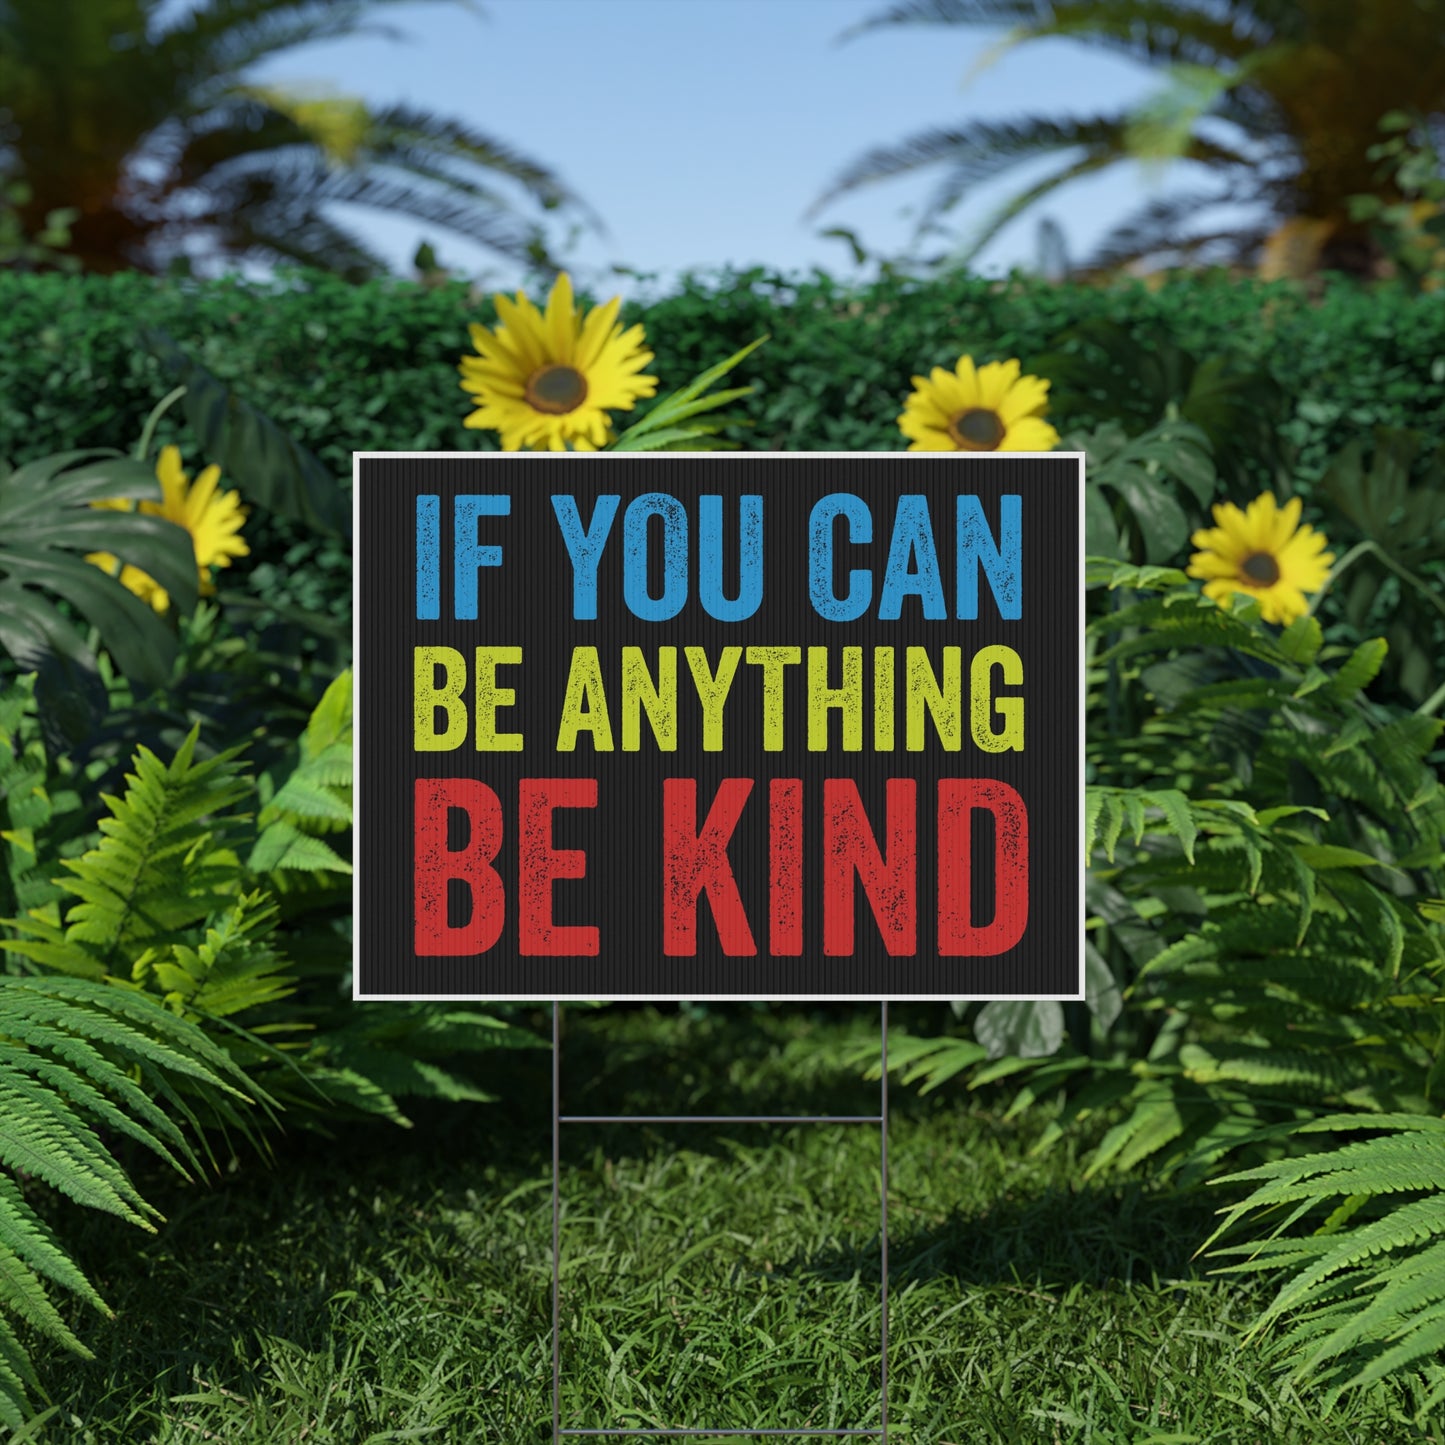 If You Can Be Anything Be Kind, Kindness, Yard Sign, Printed 2-Sided, 18x12, 24x18 or 36x24, Metal H-Stake Included